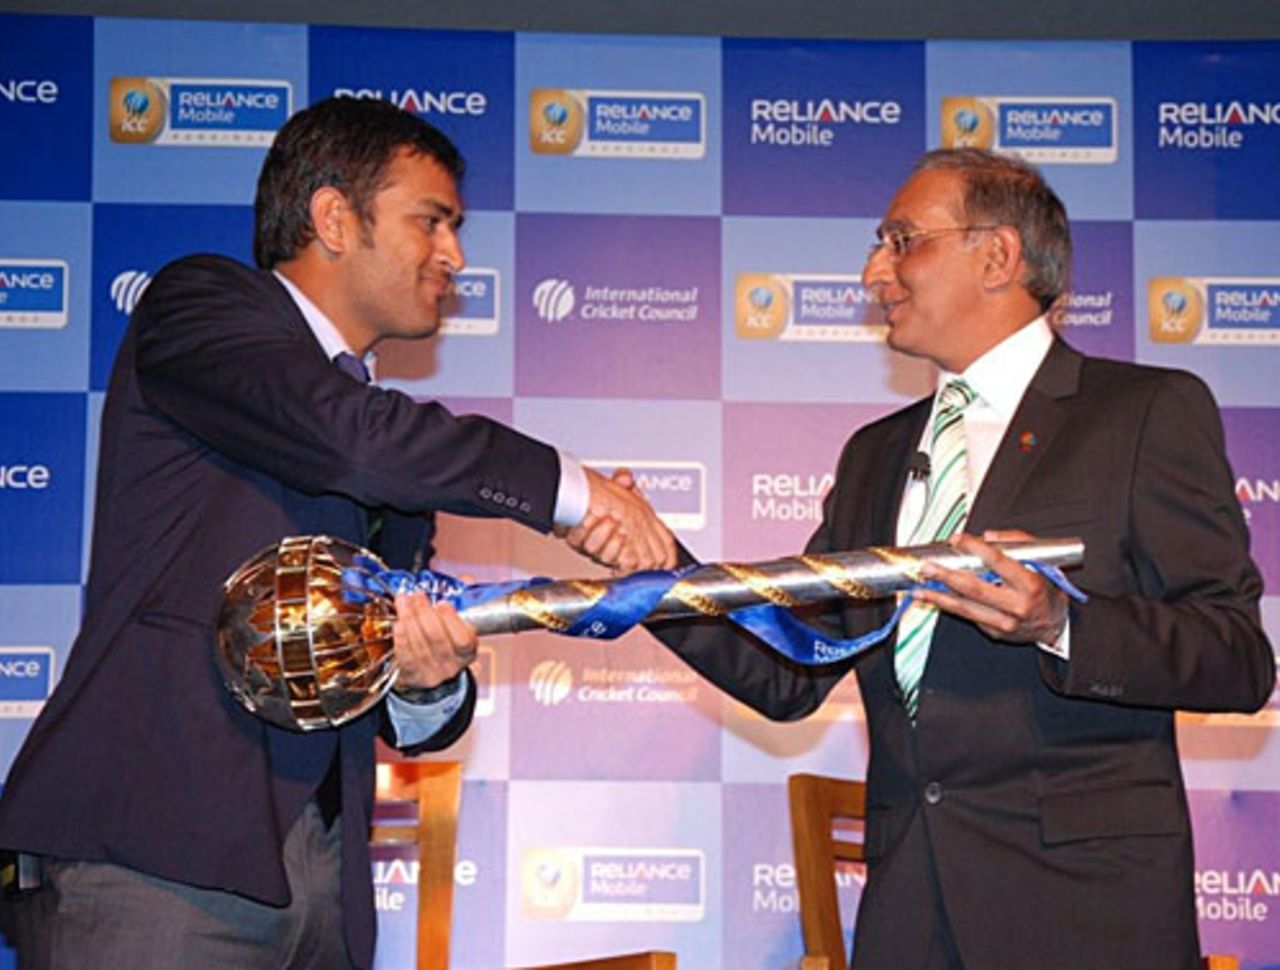 MS Dhoni receives the ICC Test Championship mace from Haroon Lorgat, New Delhi, December 27, 2009